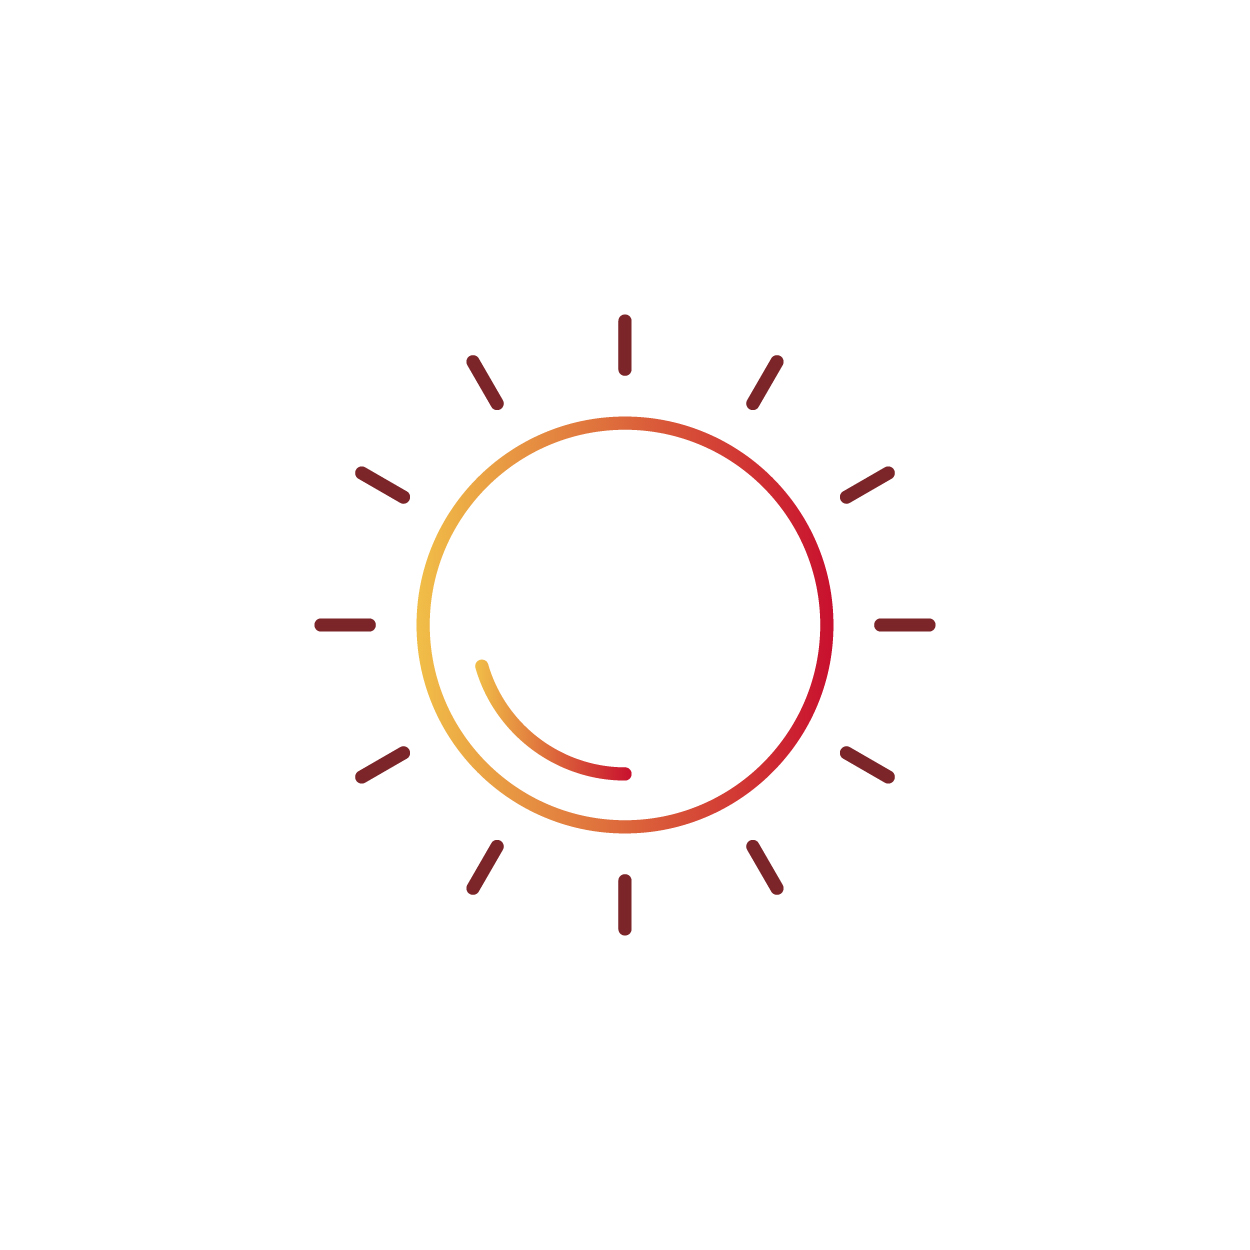 Illustrated icon of the sun